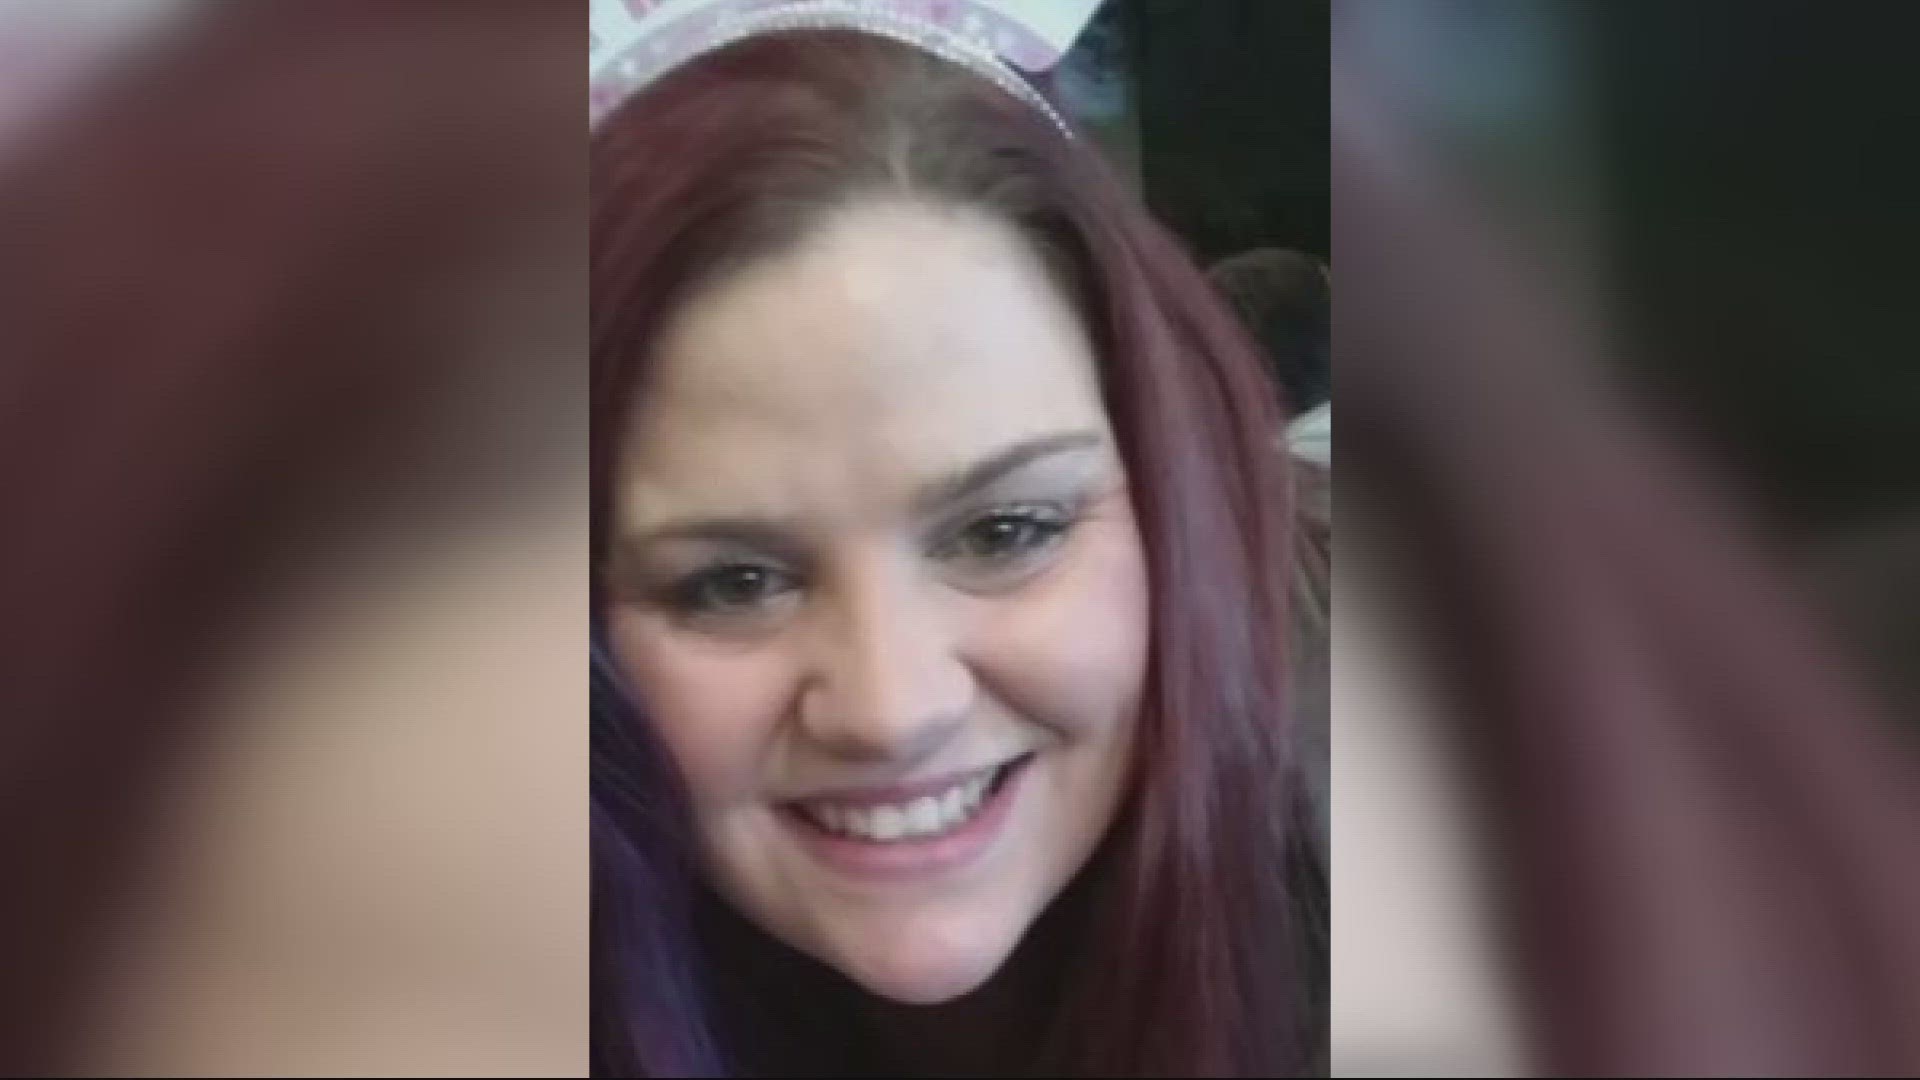 The body of 32-year-old Joanna Speaks was found near an abandoned barn in the Ridgefield area on April 8. She was a mother of three children.